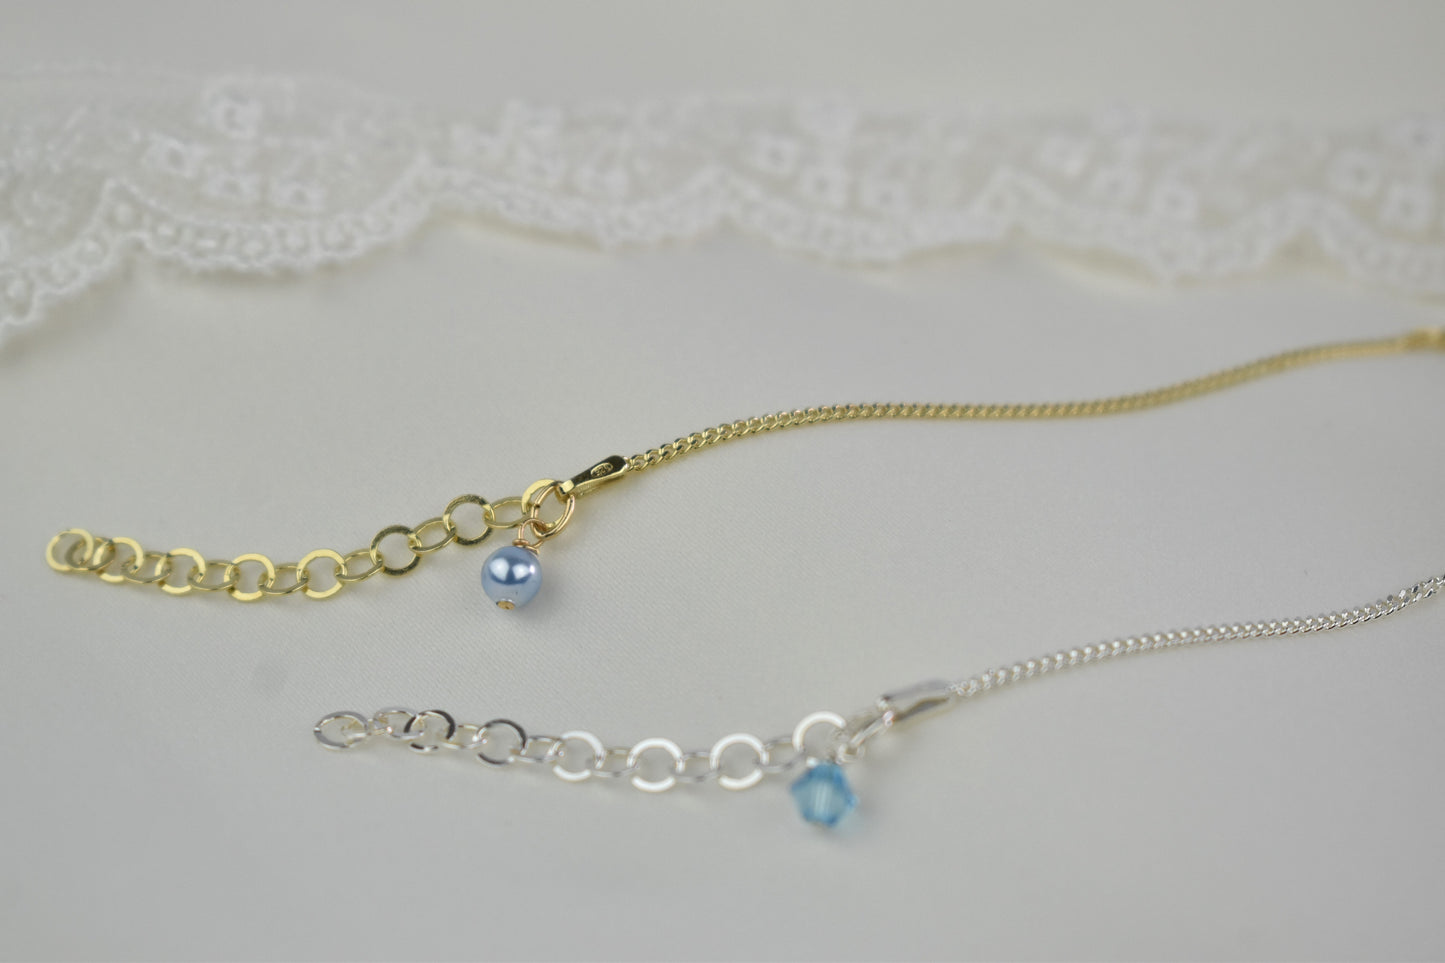 Something Blue anklet available in your choice of sterling silver or sterling silver with gold plating. Choice of blue pearl or blue crystal to finish your anklet.